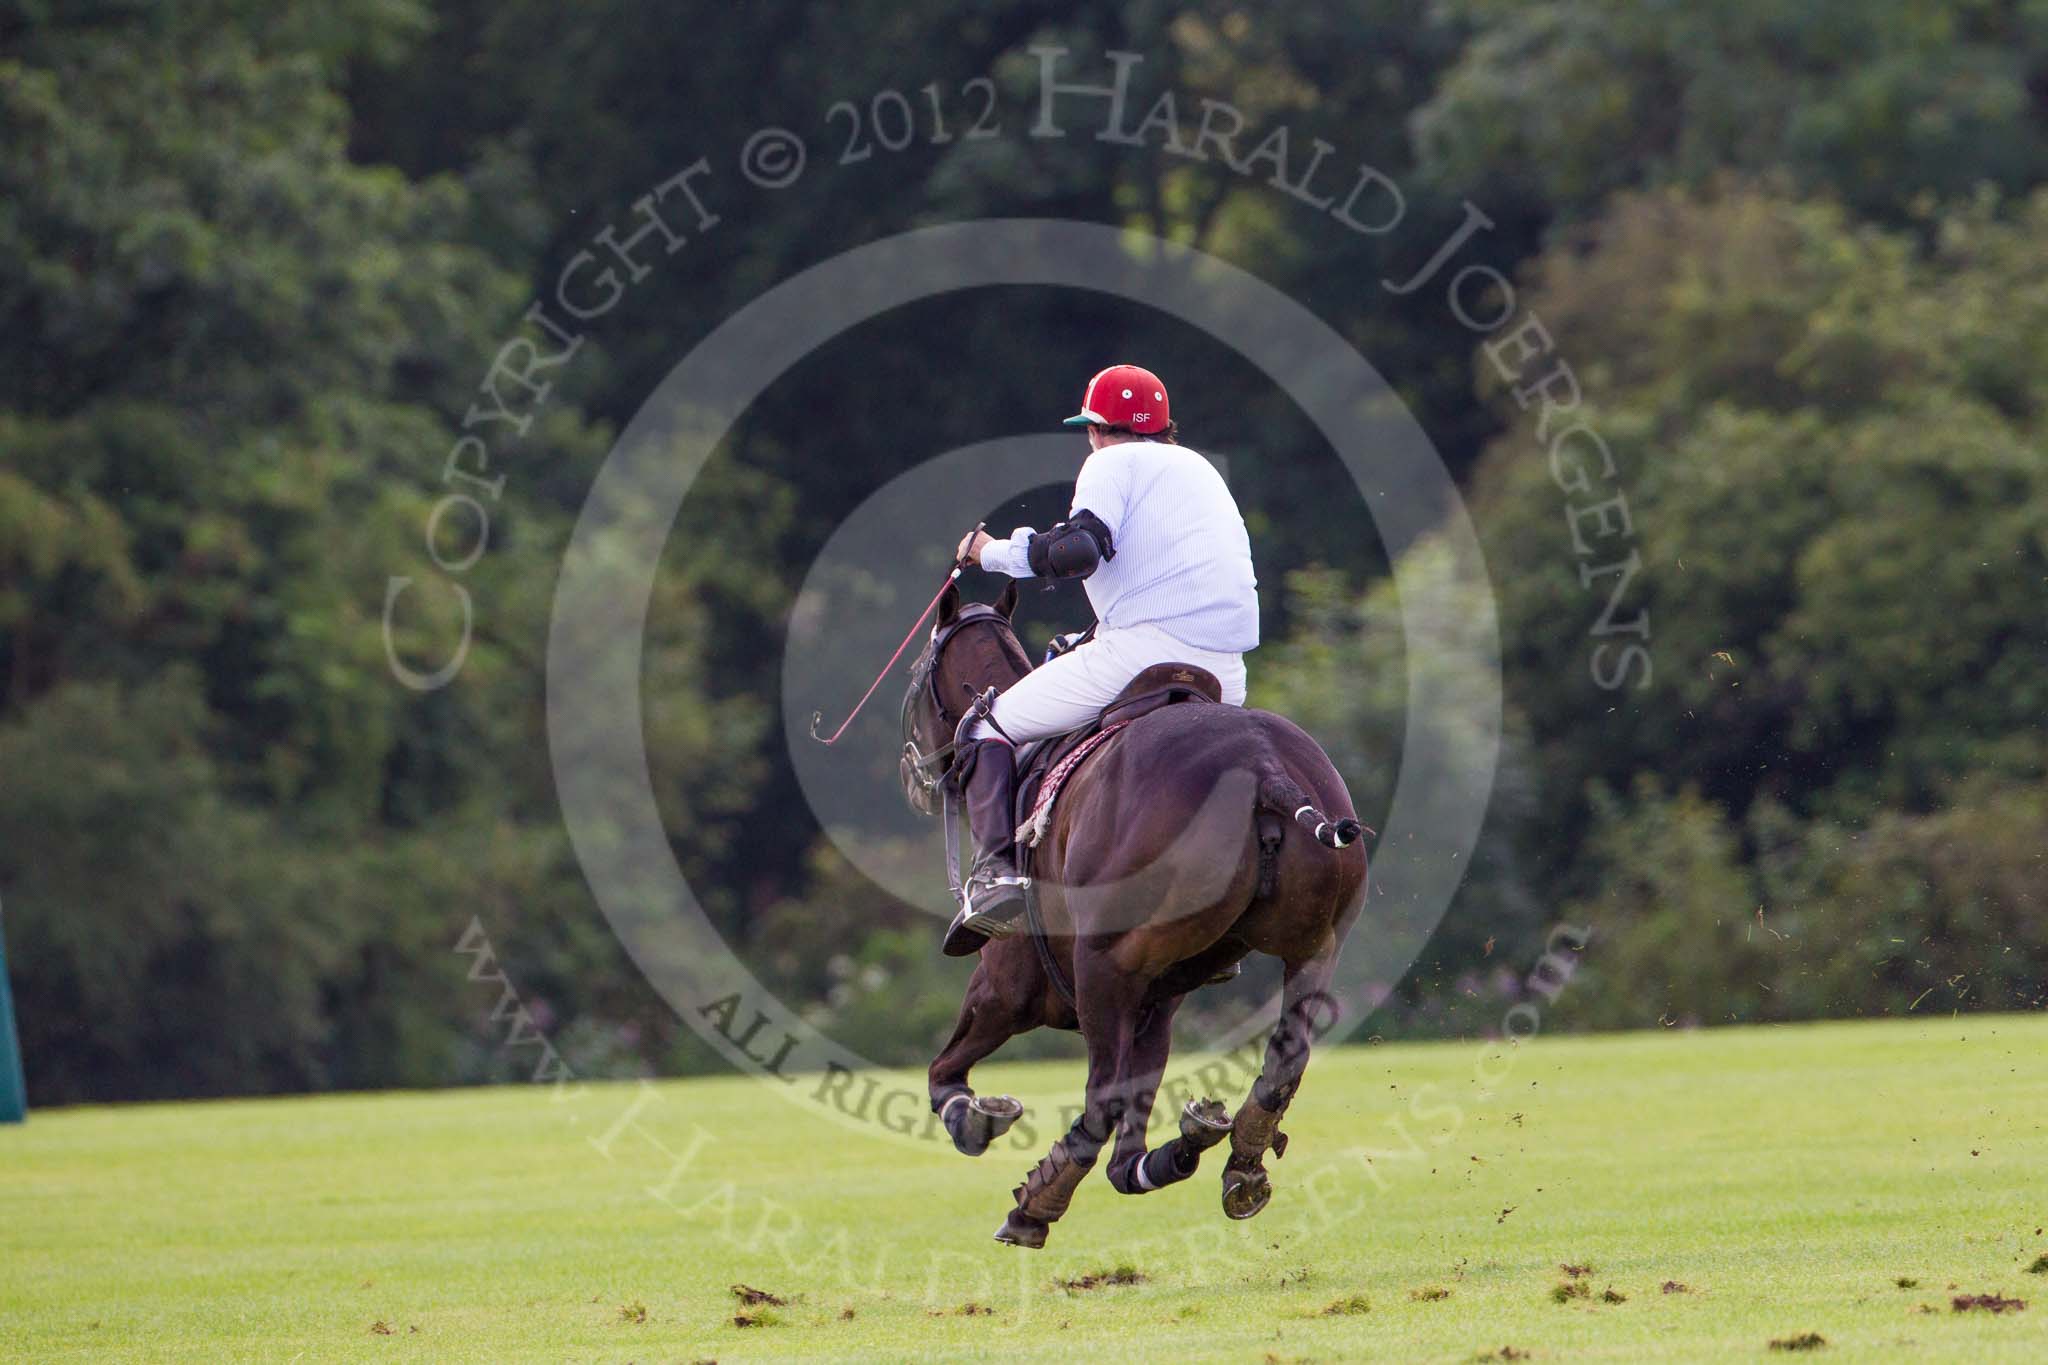 7th Heritage Polo Cup finals: La Mariposa Argentina, Sebastian Funes..
Hurtwood Park Polo Club,
Ewhurst Green,
Surrey,
United Kingdom,
on 05 August 2012 at 13:21, image #15